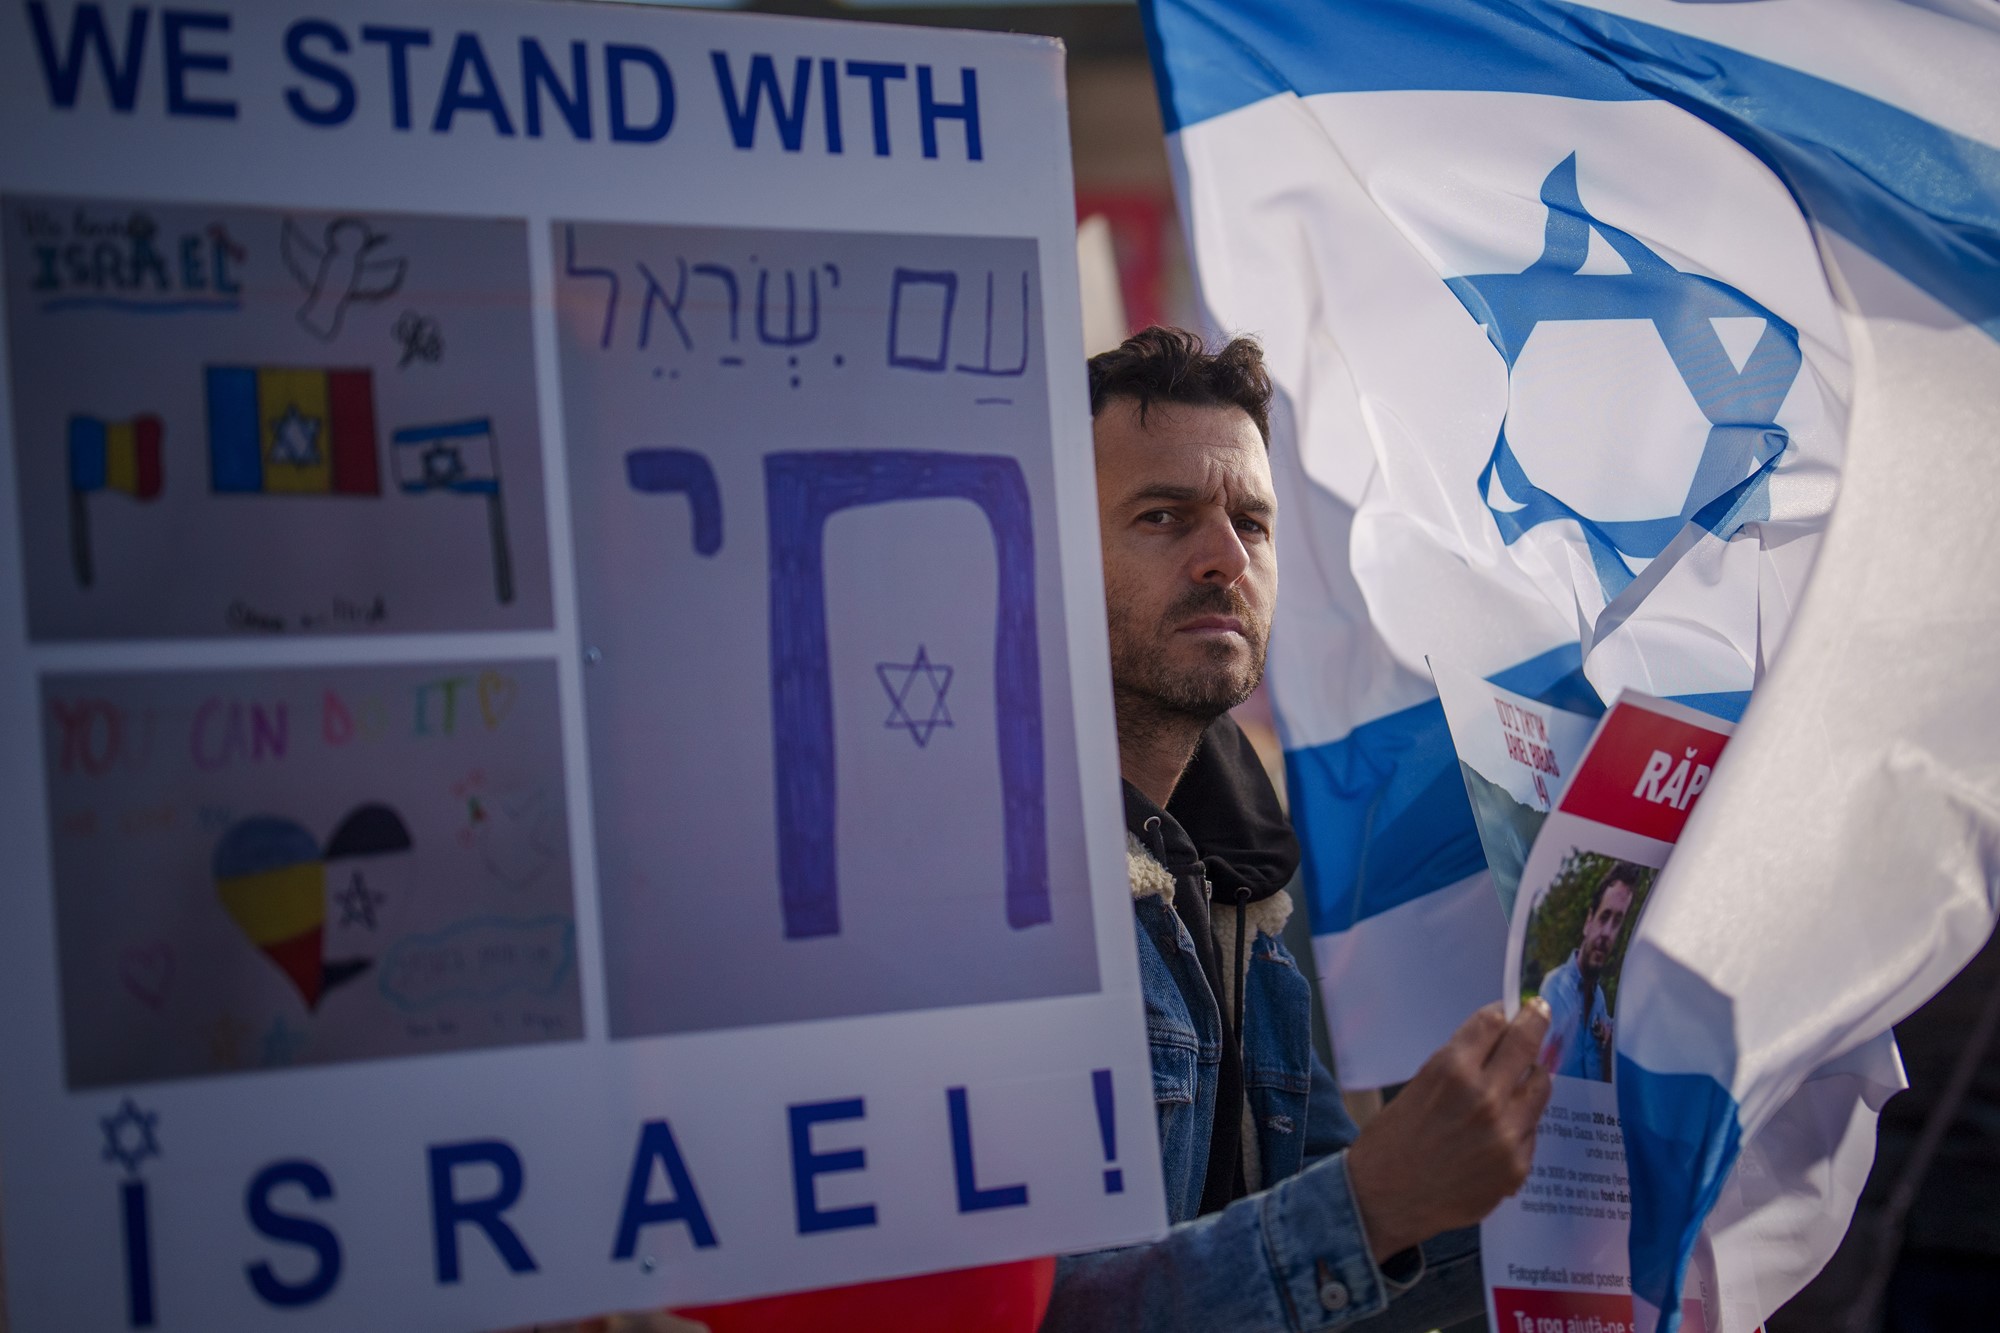 Man stands with missing poster and Israel flag in hand next to sign saying we stand with israel. 